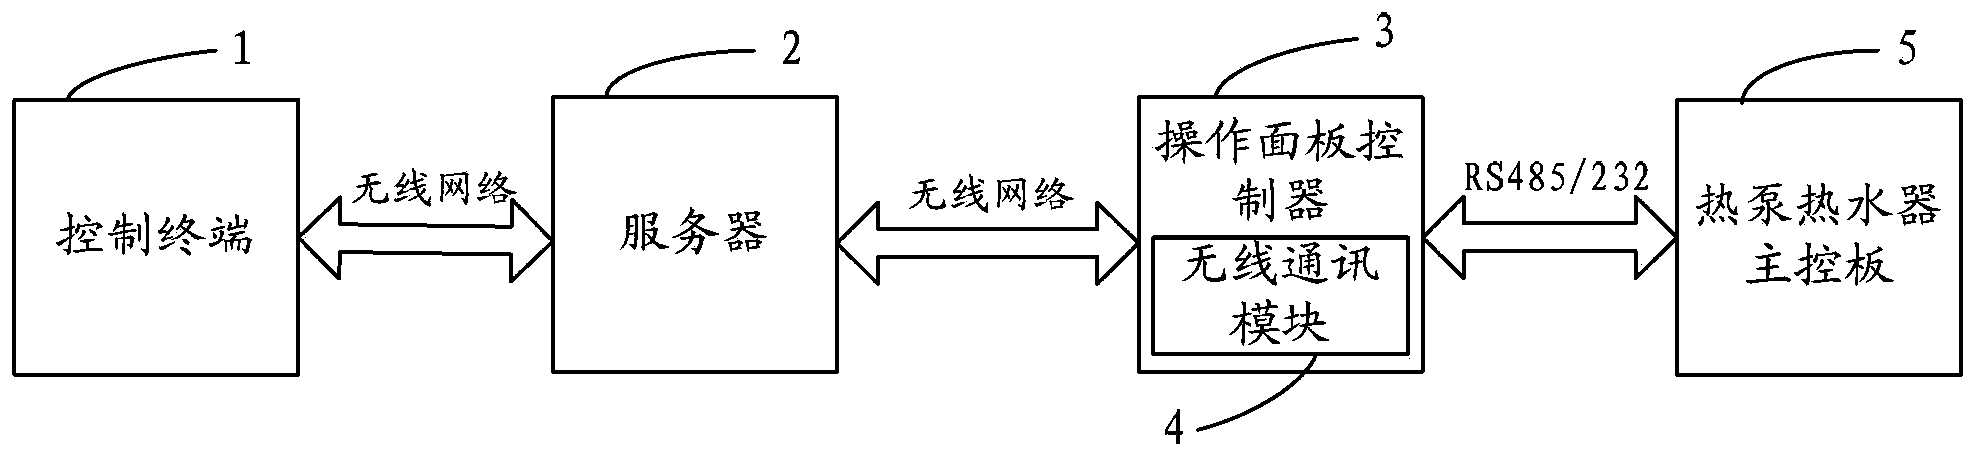 Double-compressor air energy heat pump heat supply and heating system